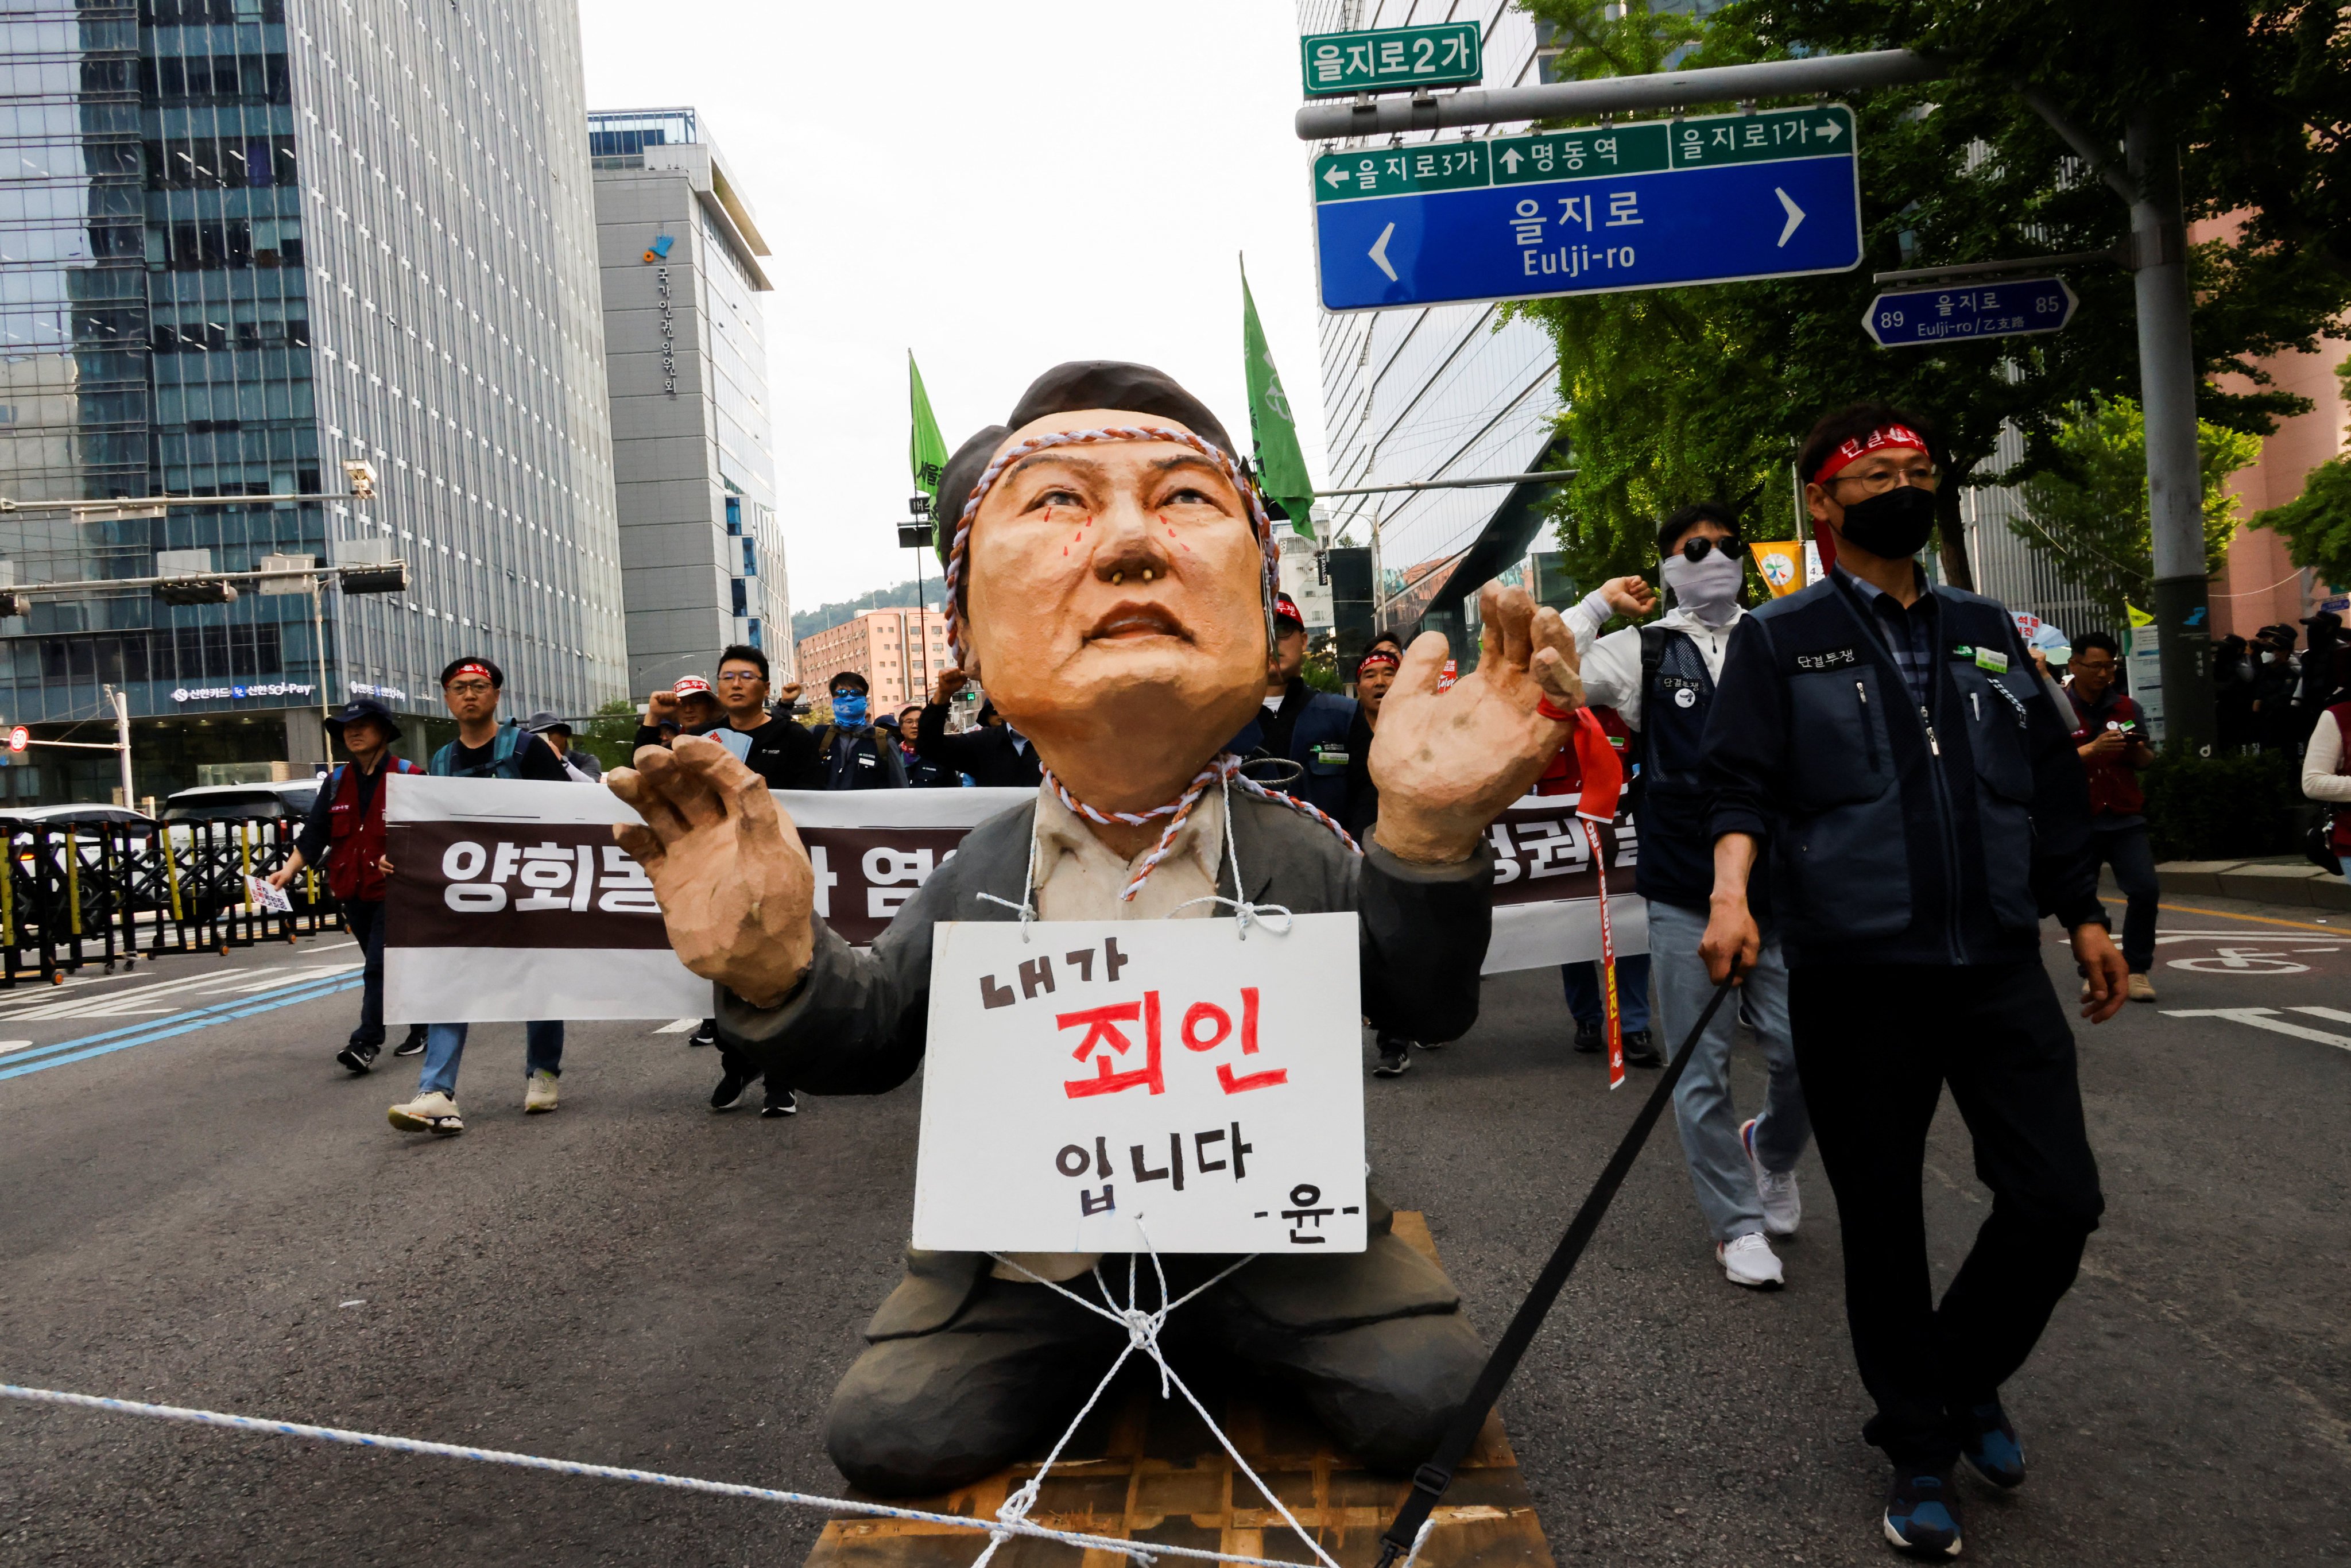 Trade unionists rally in Seoul on May 1 with an effigy of South Korean President Yoon Seok-yeol carrying a sign that reads “I am a sinner”. Yoon has largely shied away from the media spotlight. Photo: Reuters